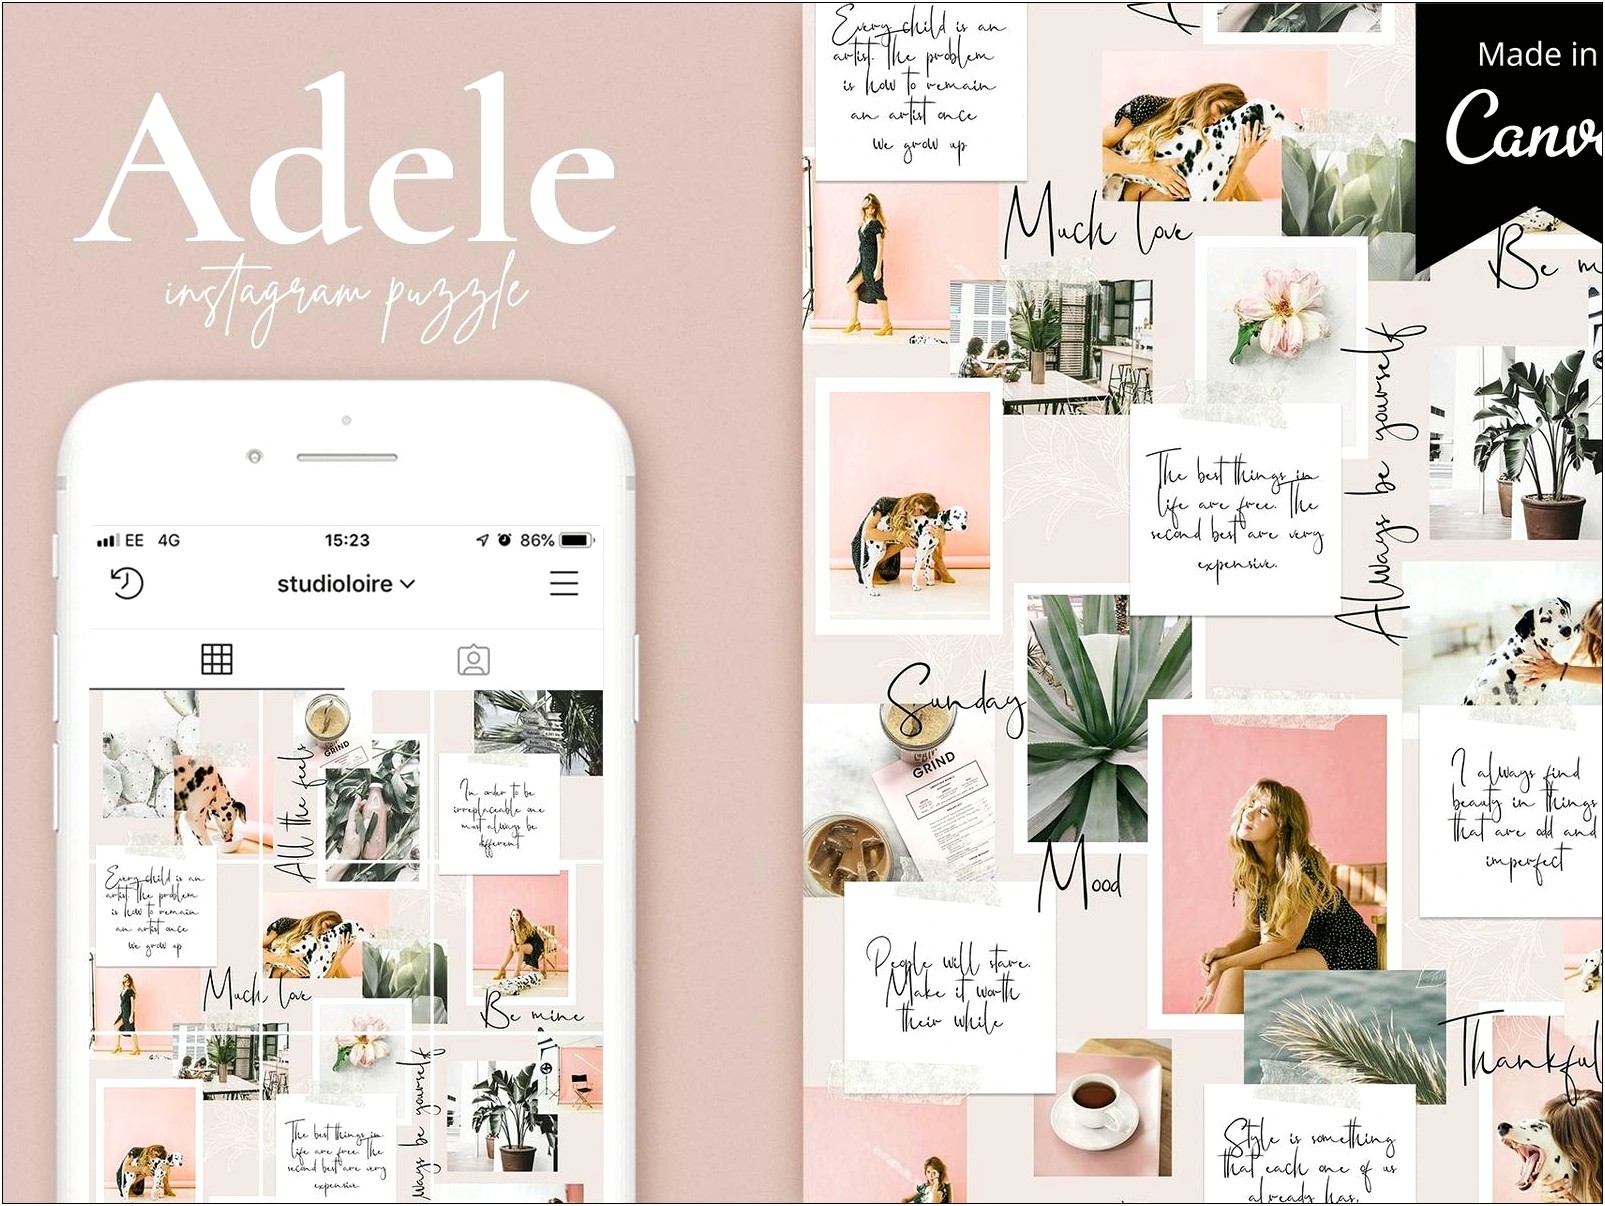 Instagram Puzzle Template Free Download Canva